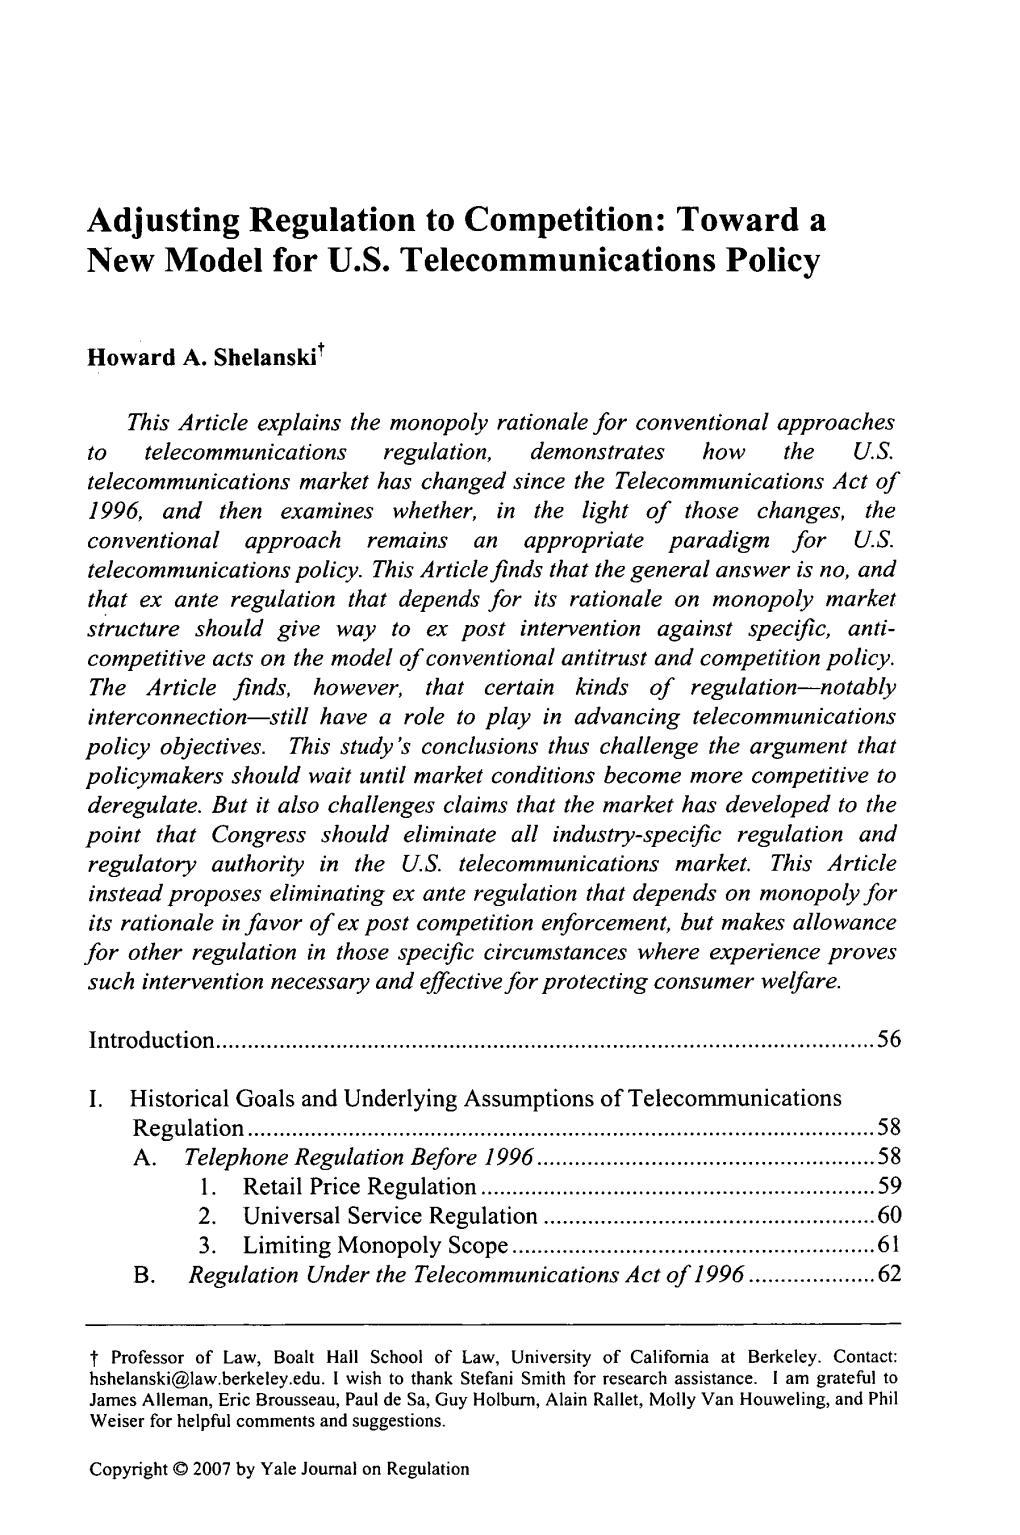 Toward a New Model for US Telecommunications Policy